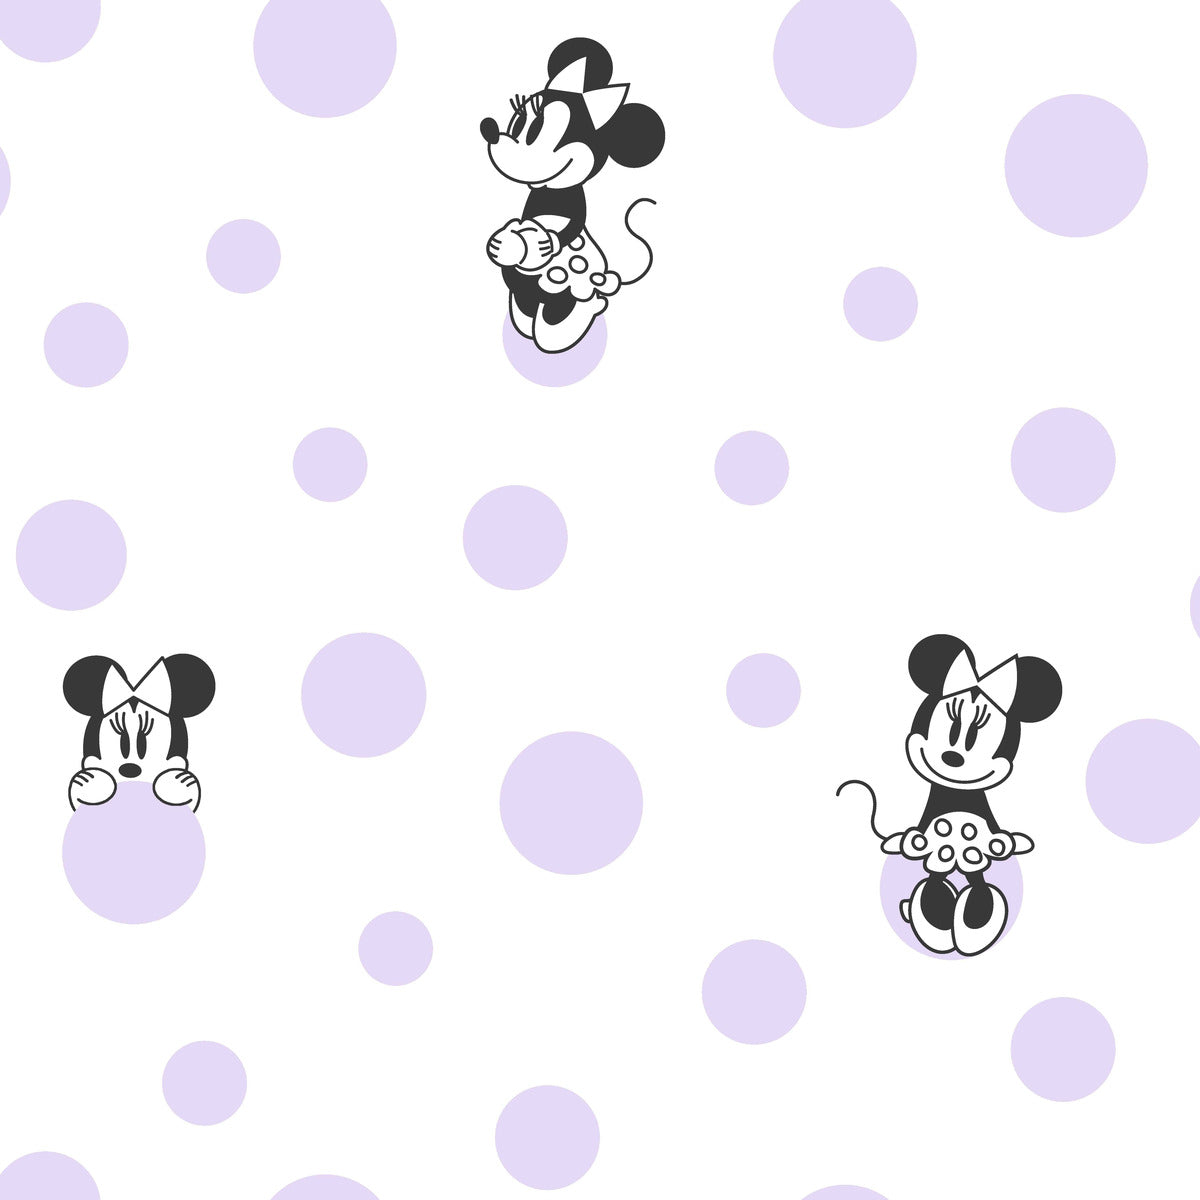 Mickey Mouse Disney Wallpapers